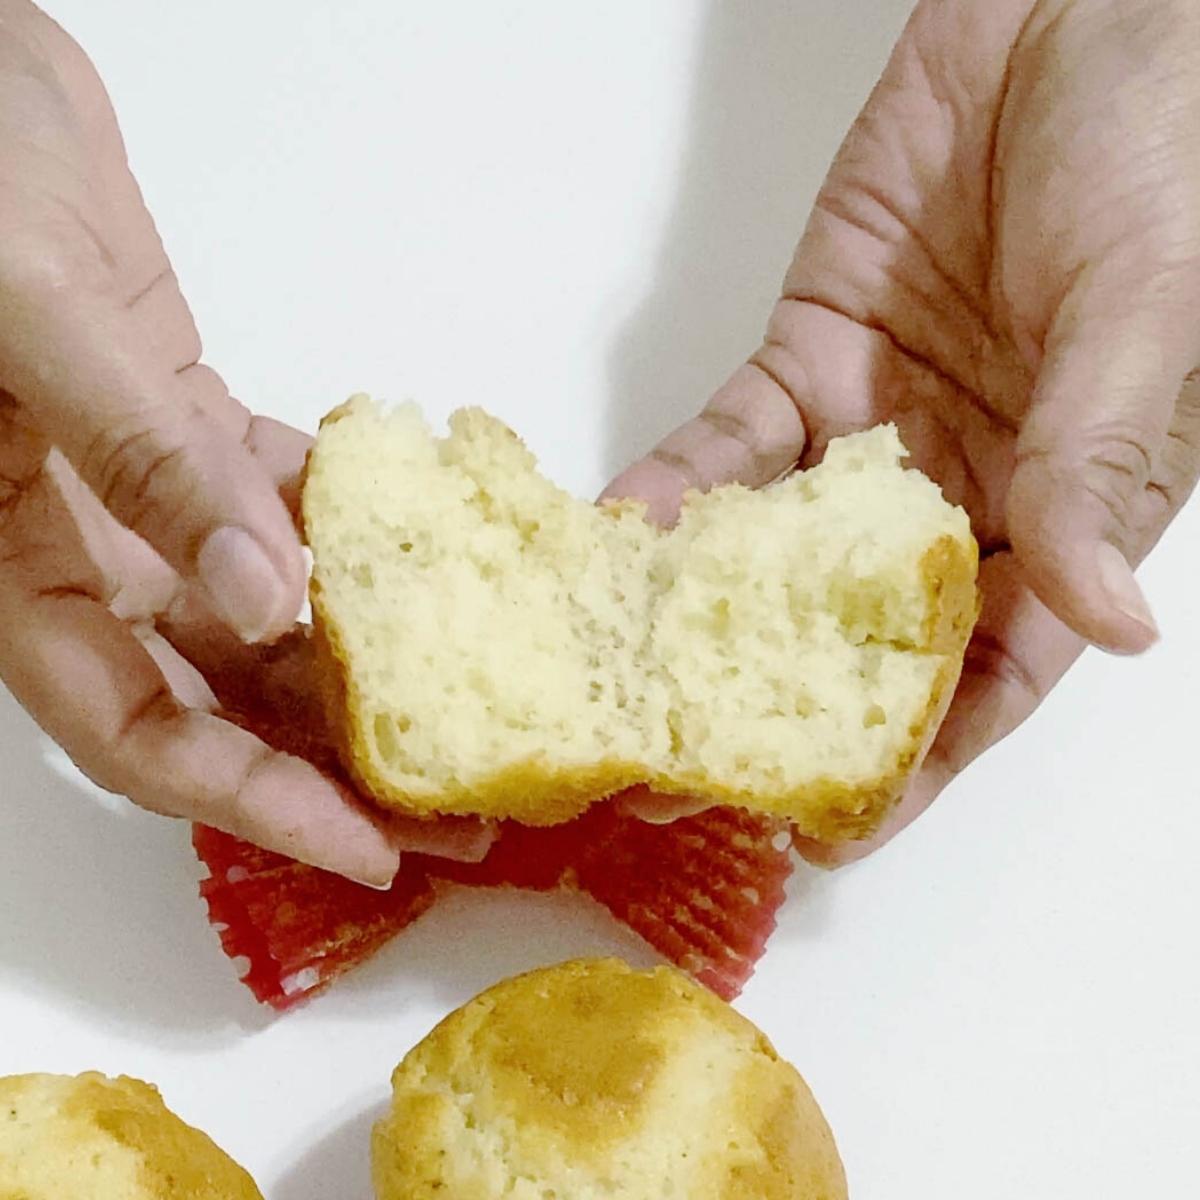 Showing the inside of a light and airy cupcake .